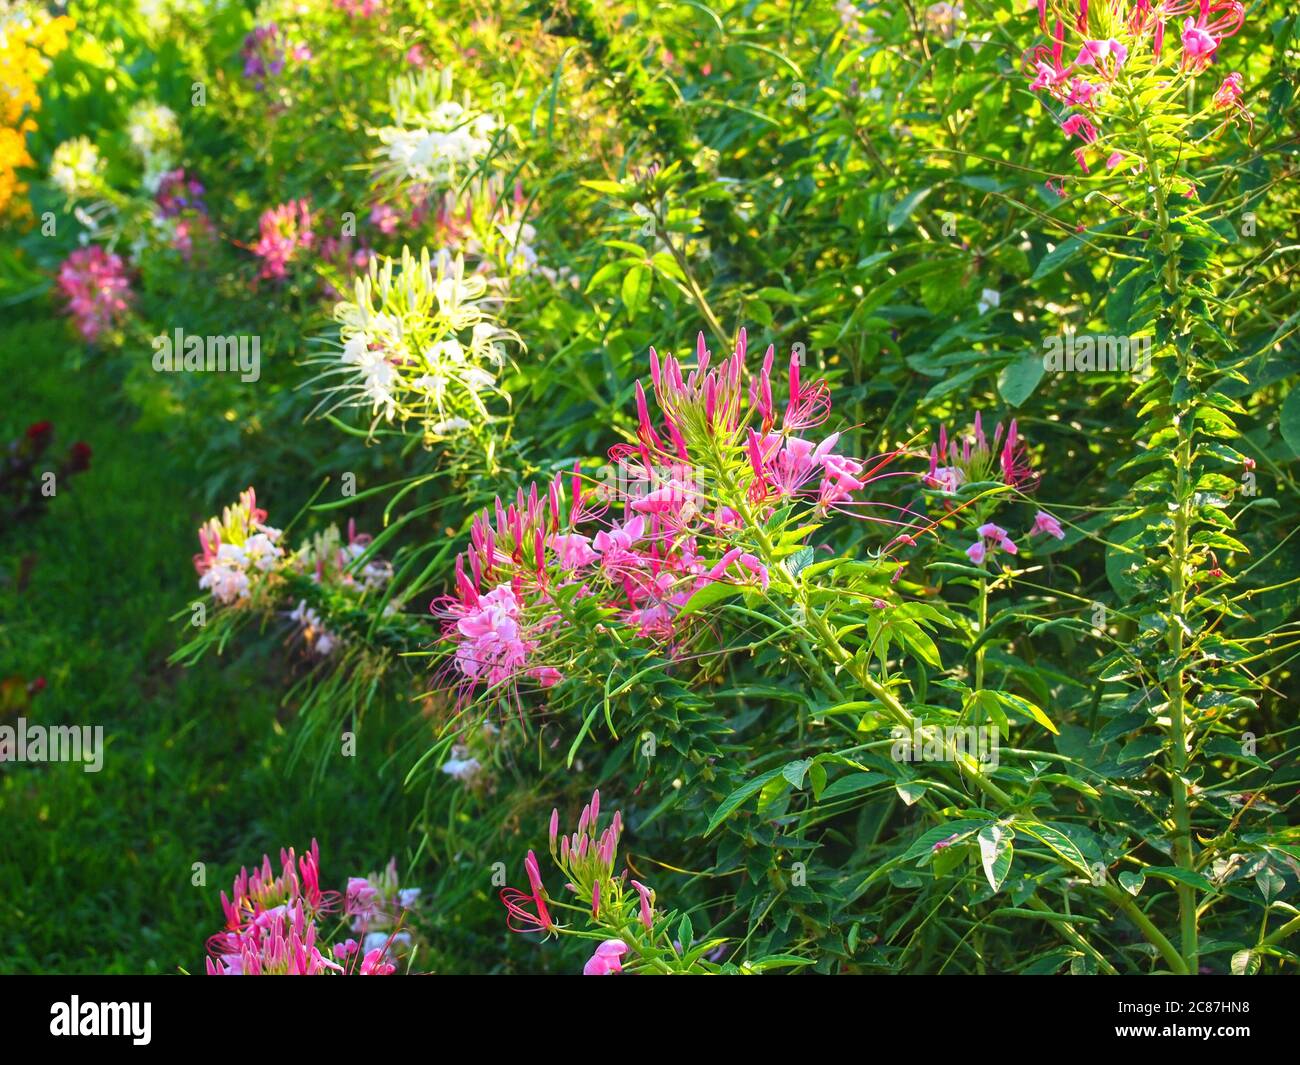 A wild array of beautiful pink Spider Flowers on tall green stems outside in the sunlight. Stock Photo